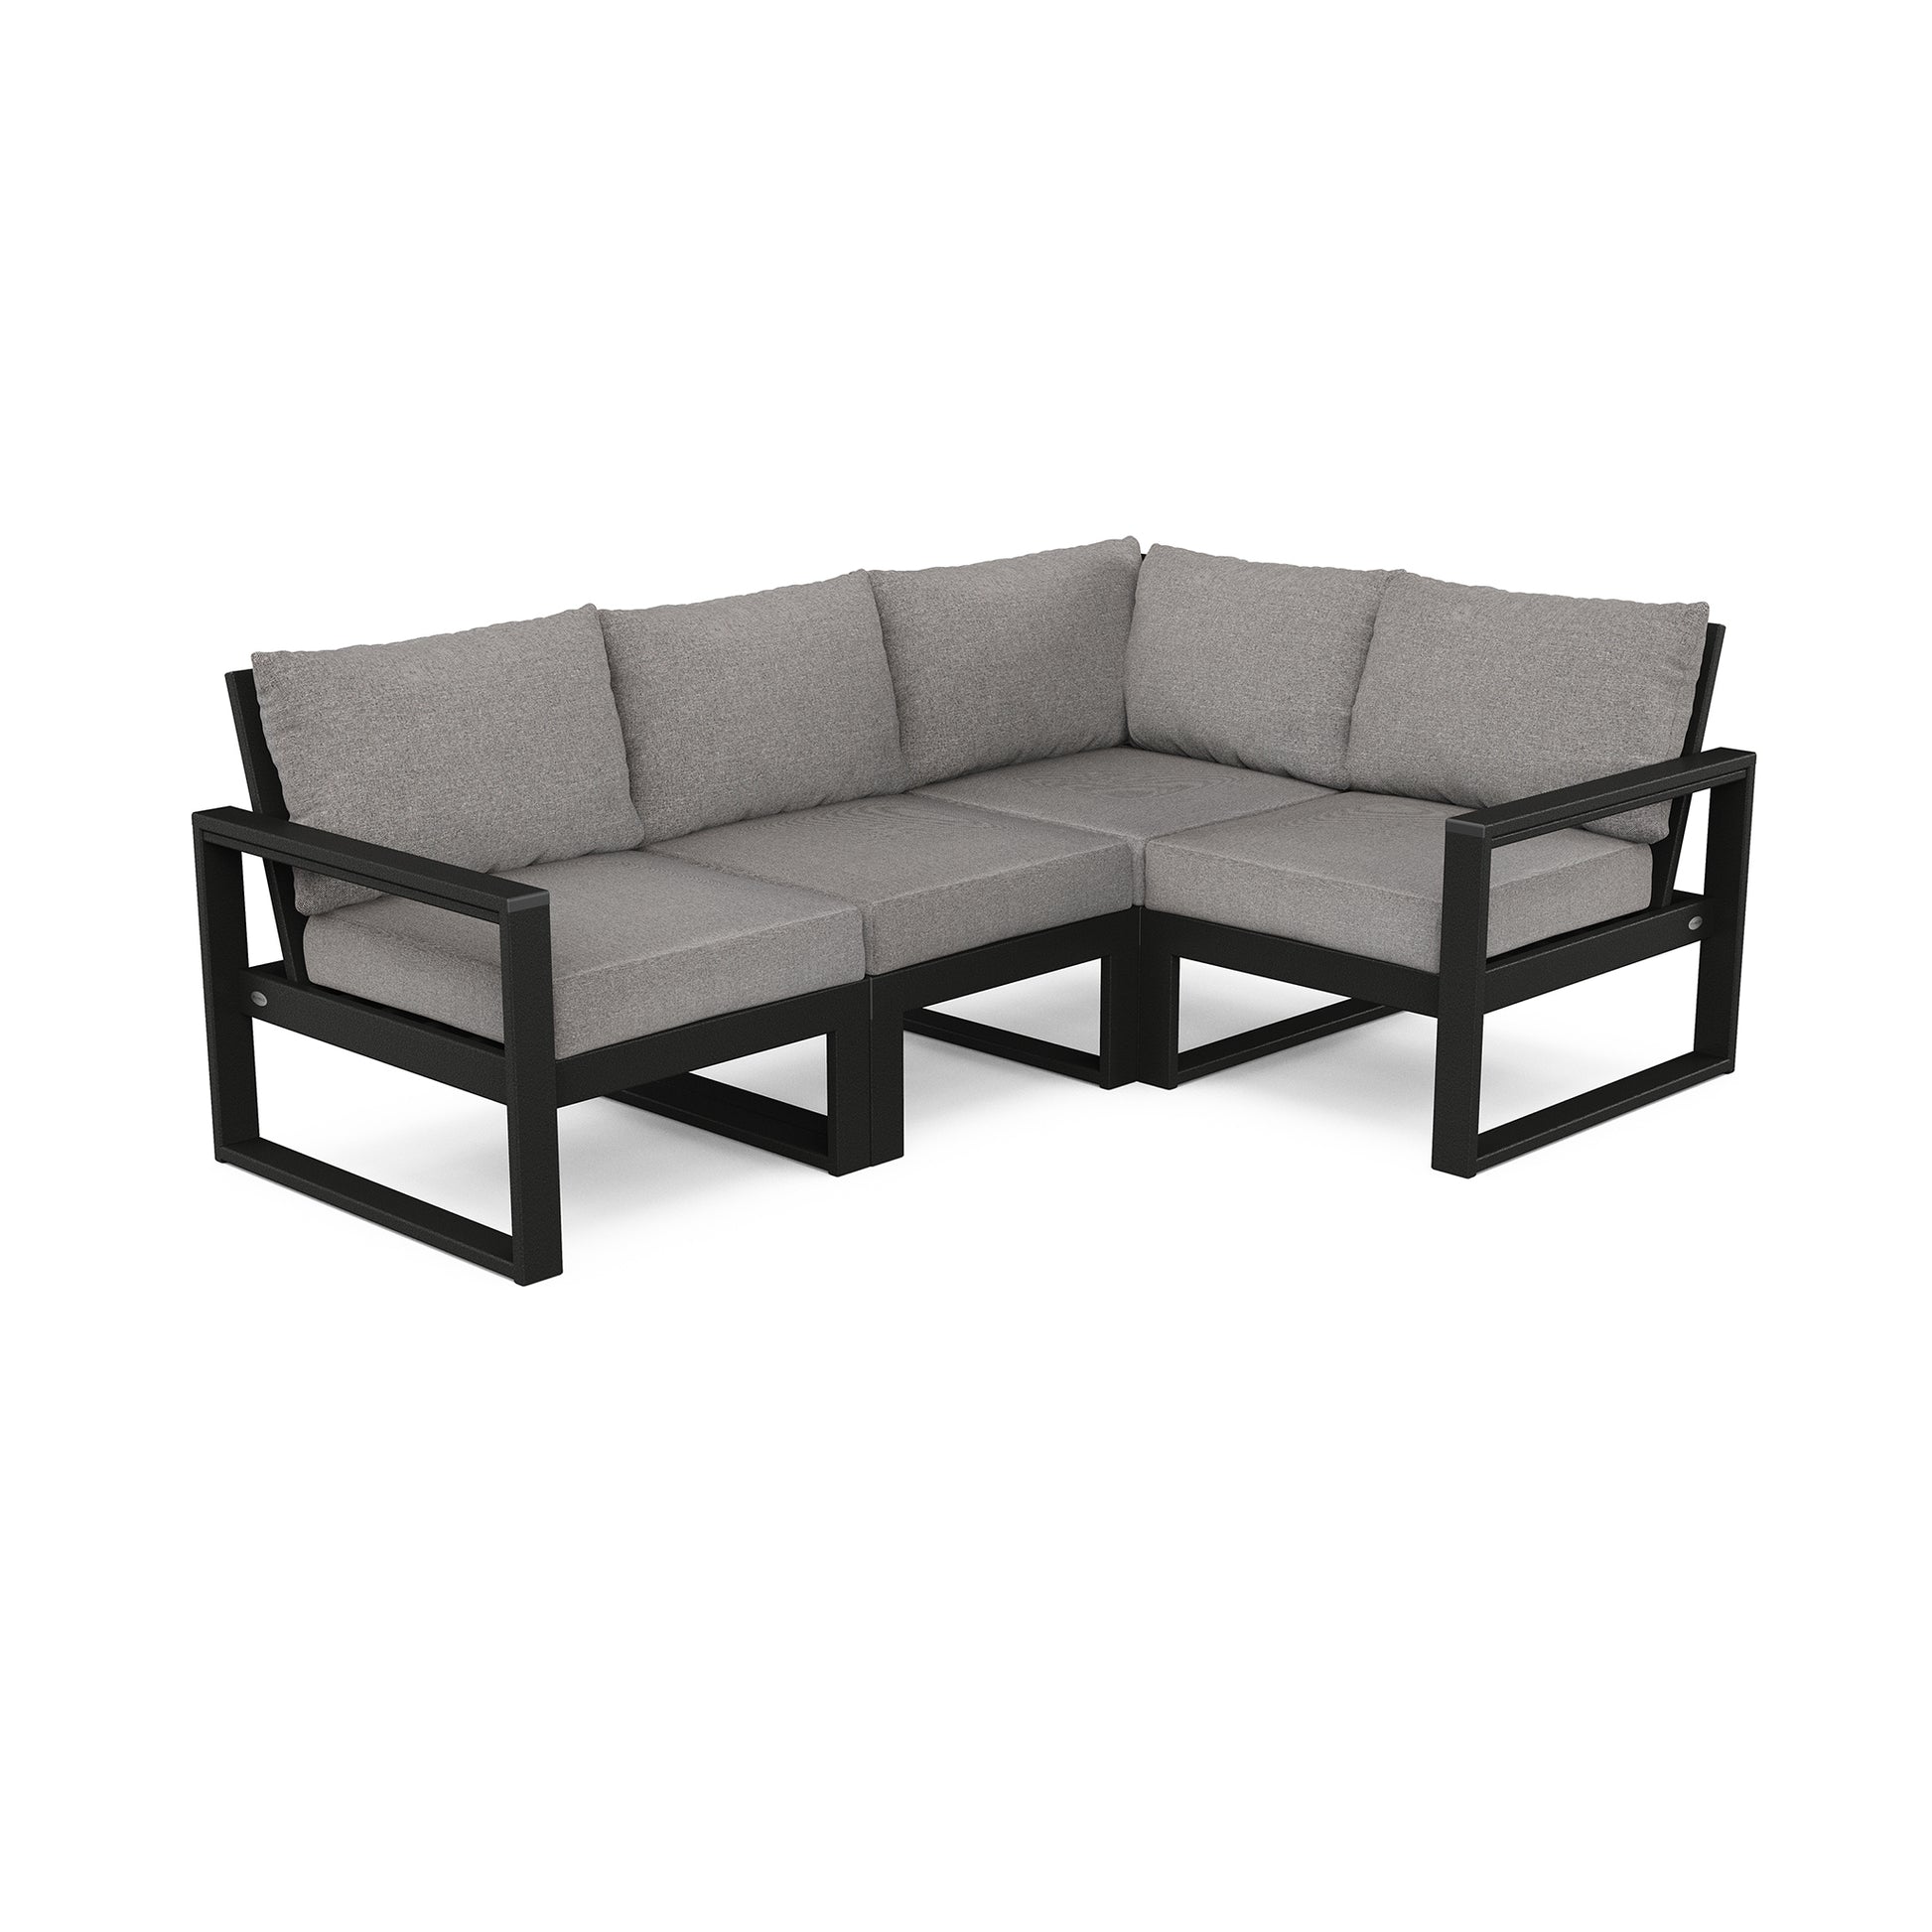 A modern corner sofa from the POLYWOOD EDGE 4-Piece Modular Deep Seating Set, with a black metal frame and light grey cushions, isolated on a white background.